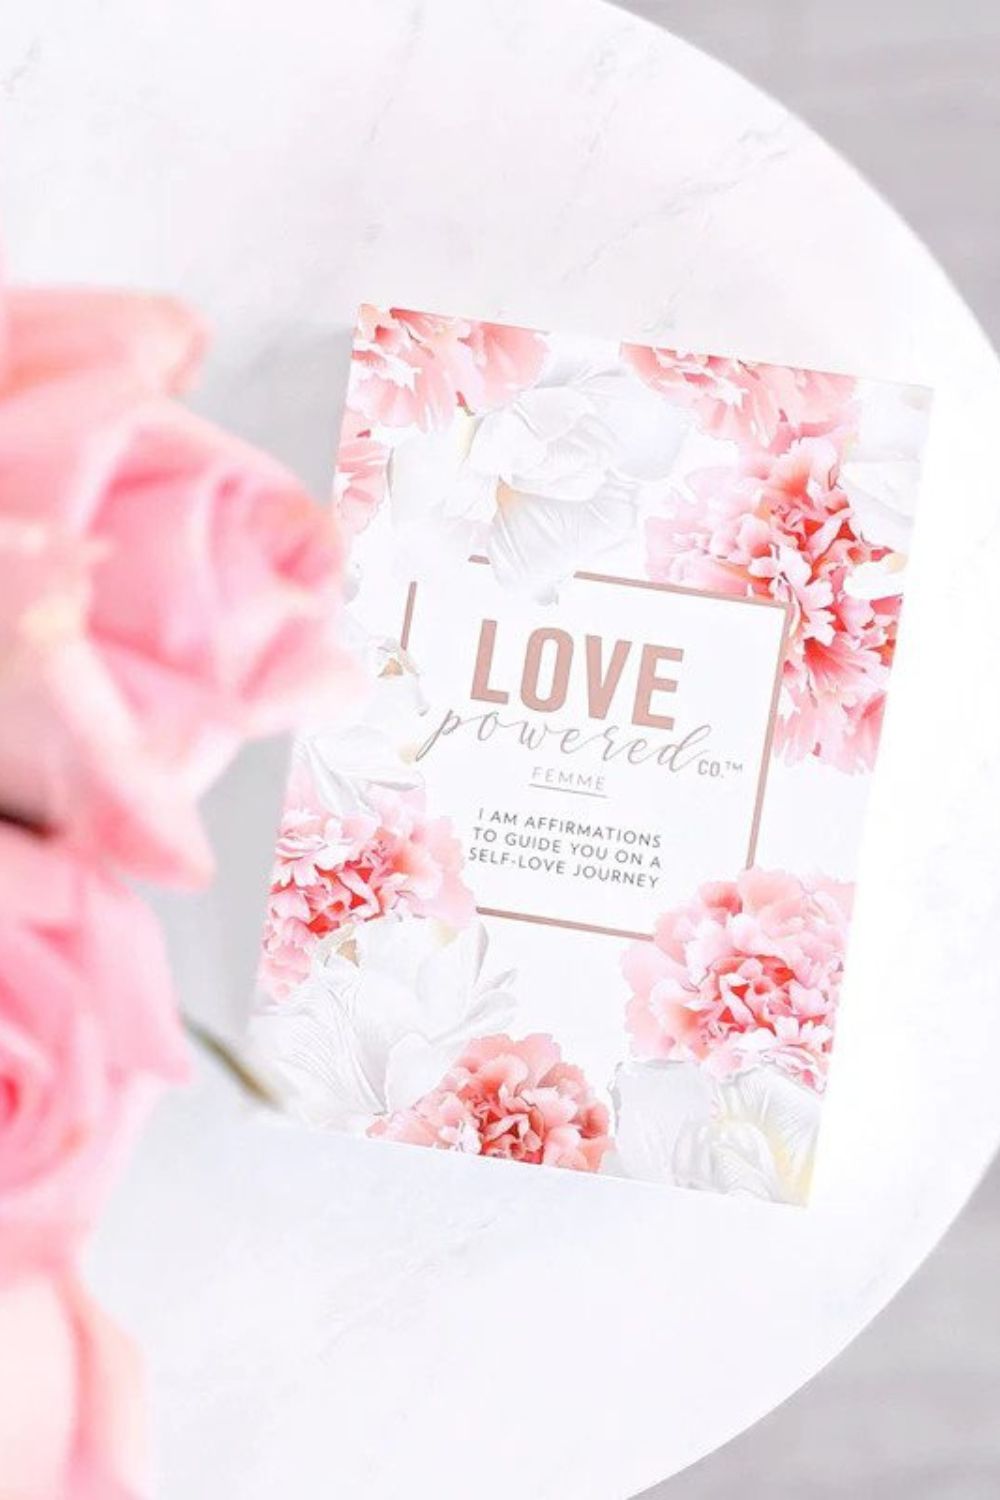 Love Powered Co. Femme Affirmations